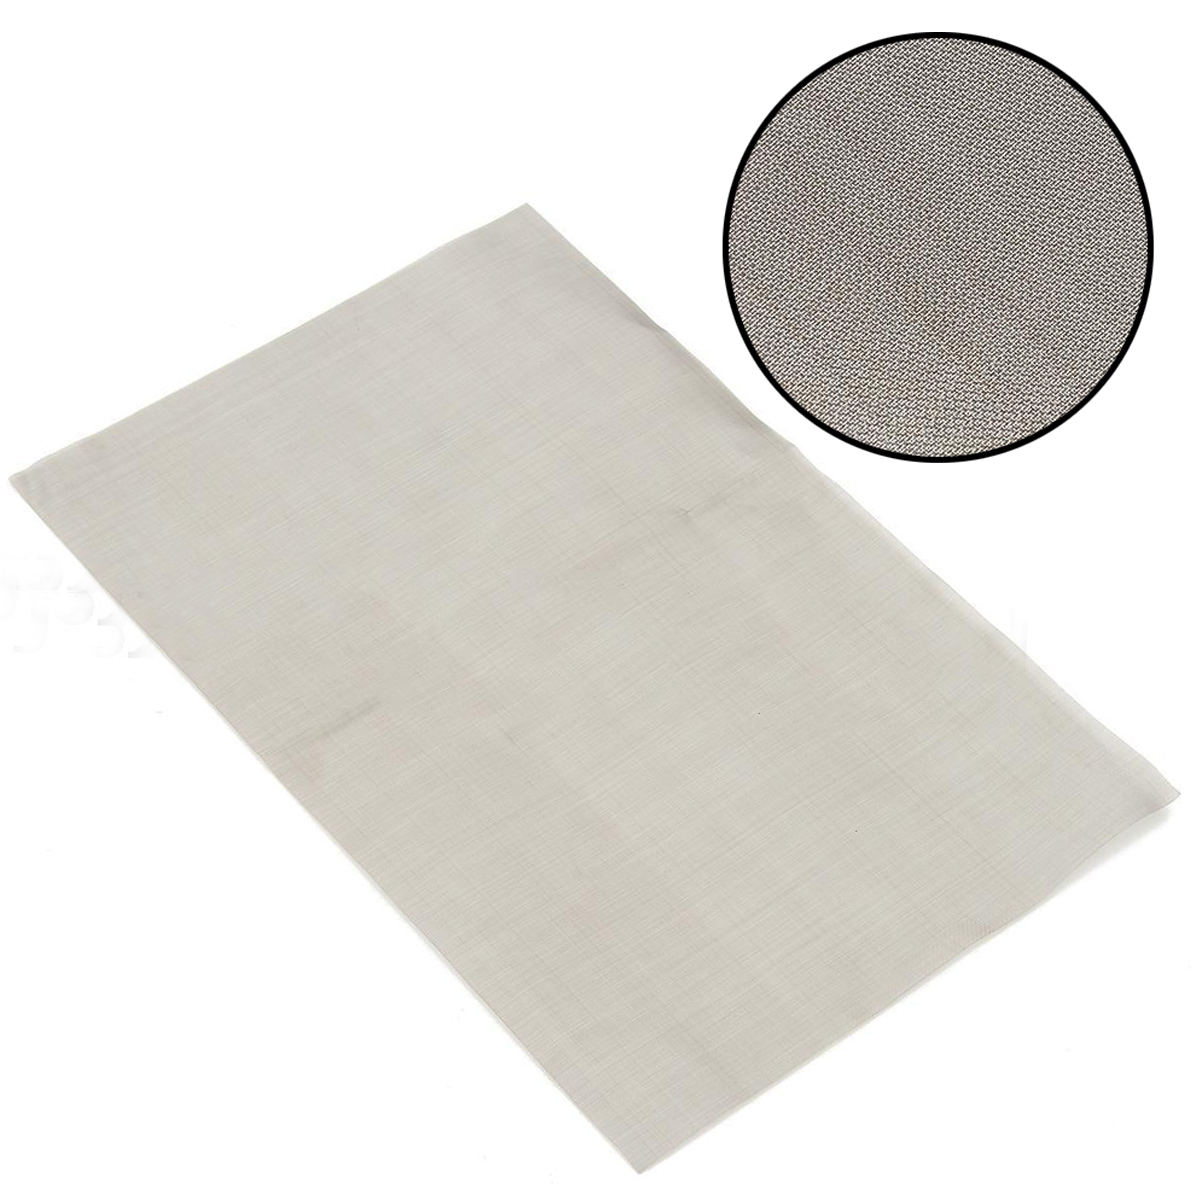 1pc Stainless Steel Woven Wire High Quality 180/300/325/400 Mesh Sheet Screen Filter 30cm*20cm For Mining Medicine Tools Mayitr